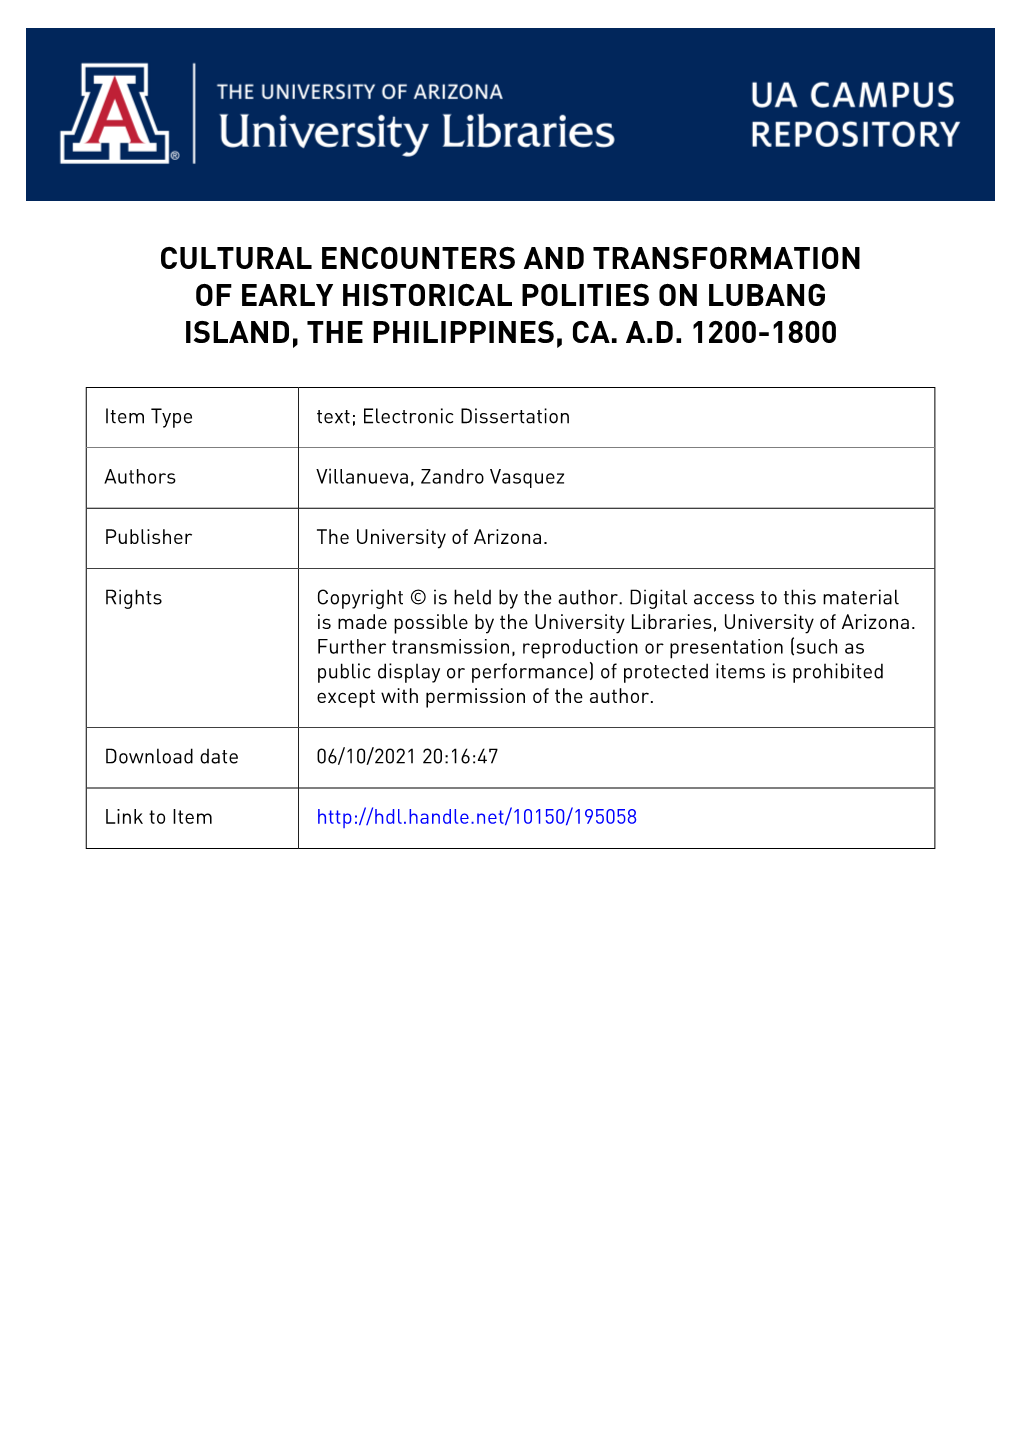 Cultural Encounters and Transformation of Early Historical Polities on Lubang Island, the Philippines, Ca